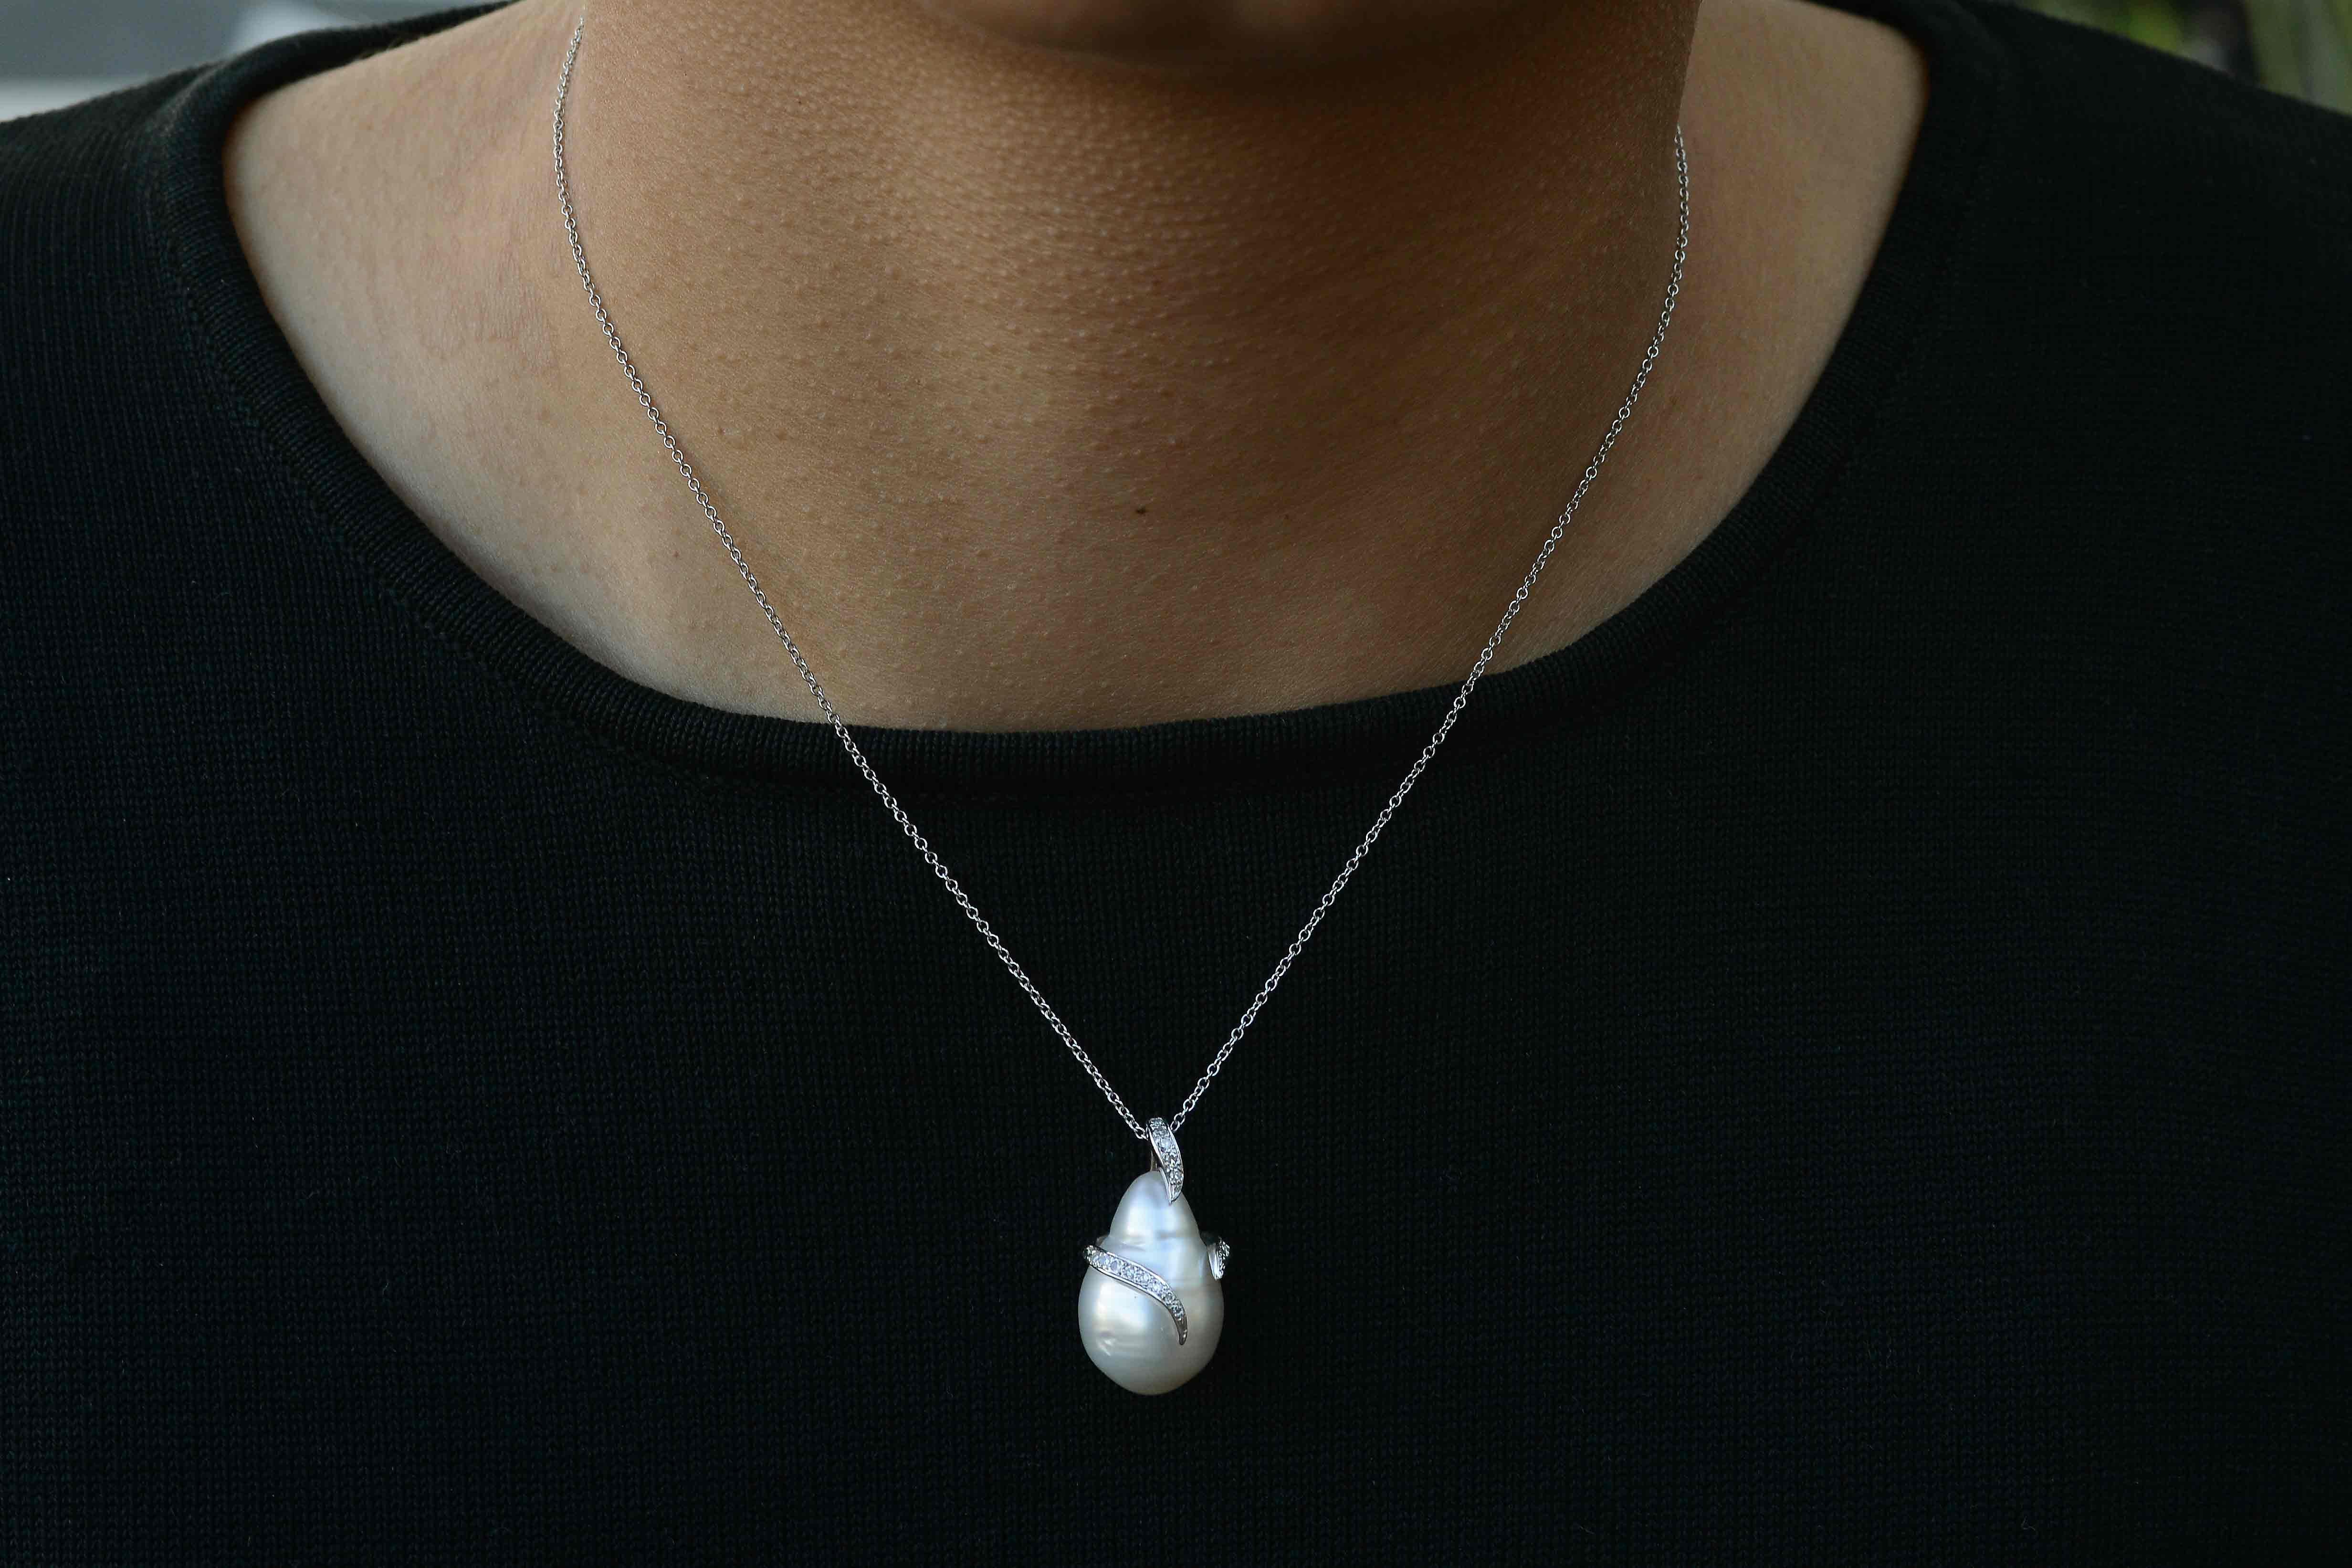 A lustrous and luminous white South Sea pearl pendant necklace. The large, teardrop shape baroque pearl shimmers seductively and has a diamond snake wrapped around it and is completed by a 14k white gold roll chain. So wearable and chic, you can